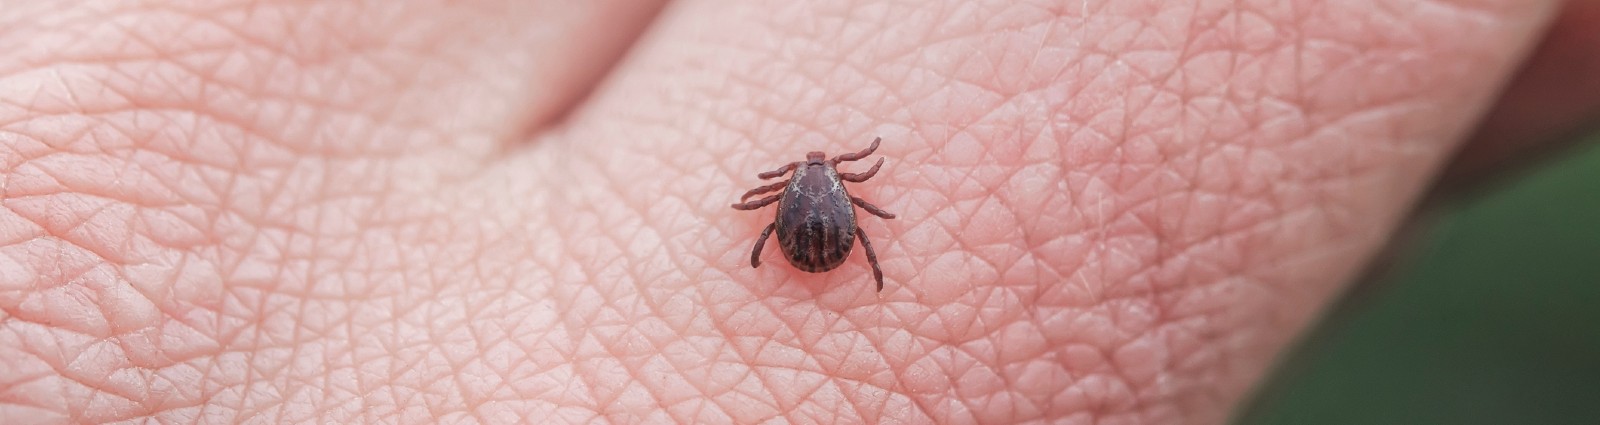 Common ticks in California and how to get rid of ticks